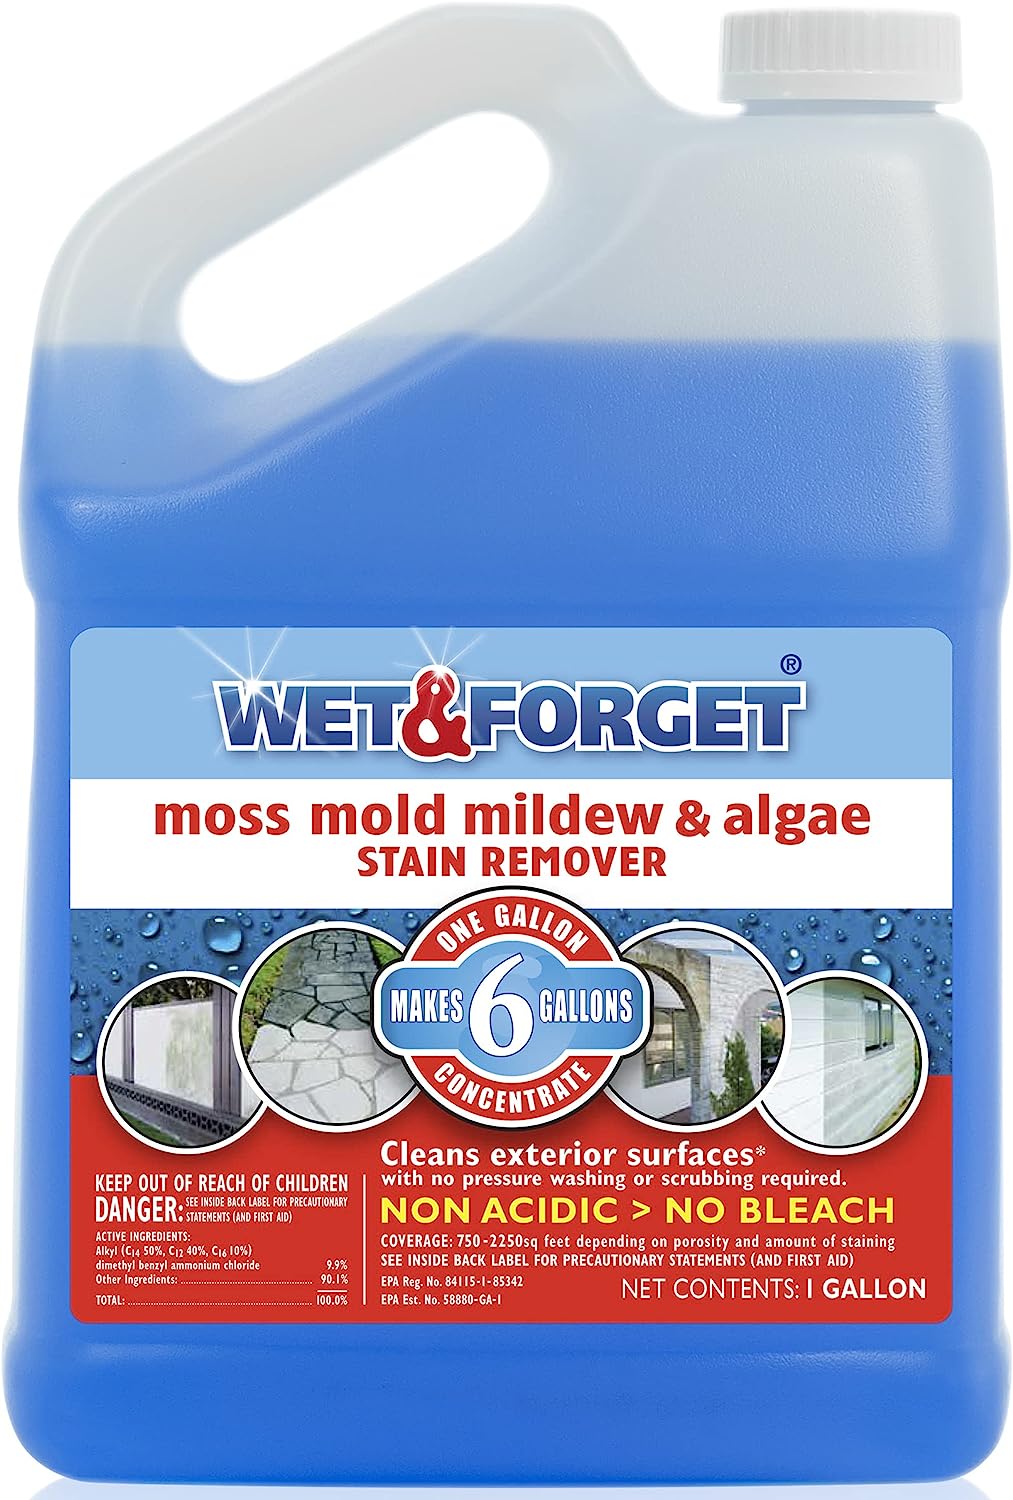 Wet & Forget Moss, Mold, Mildew, & Algae Stain Remover [...]